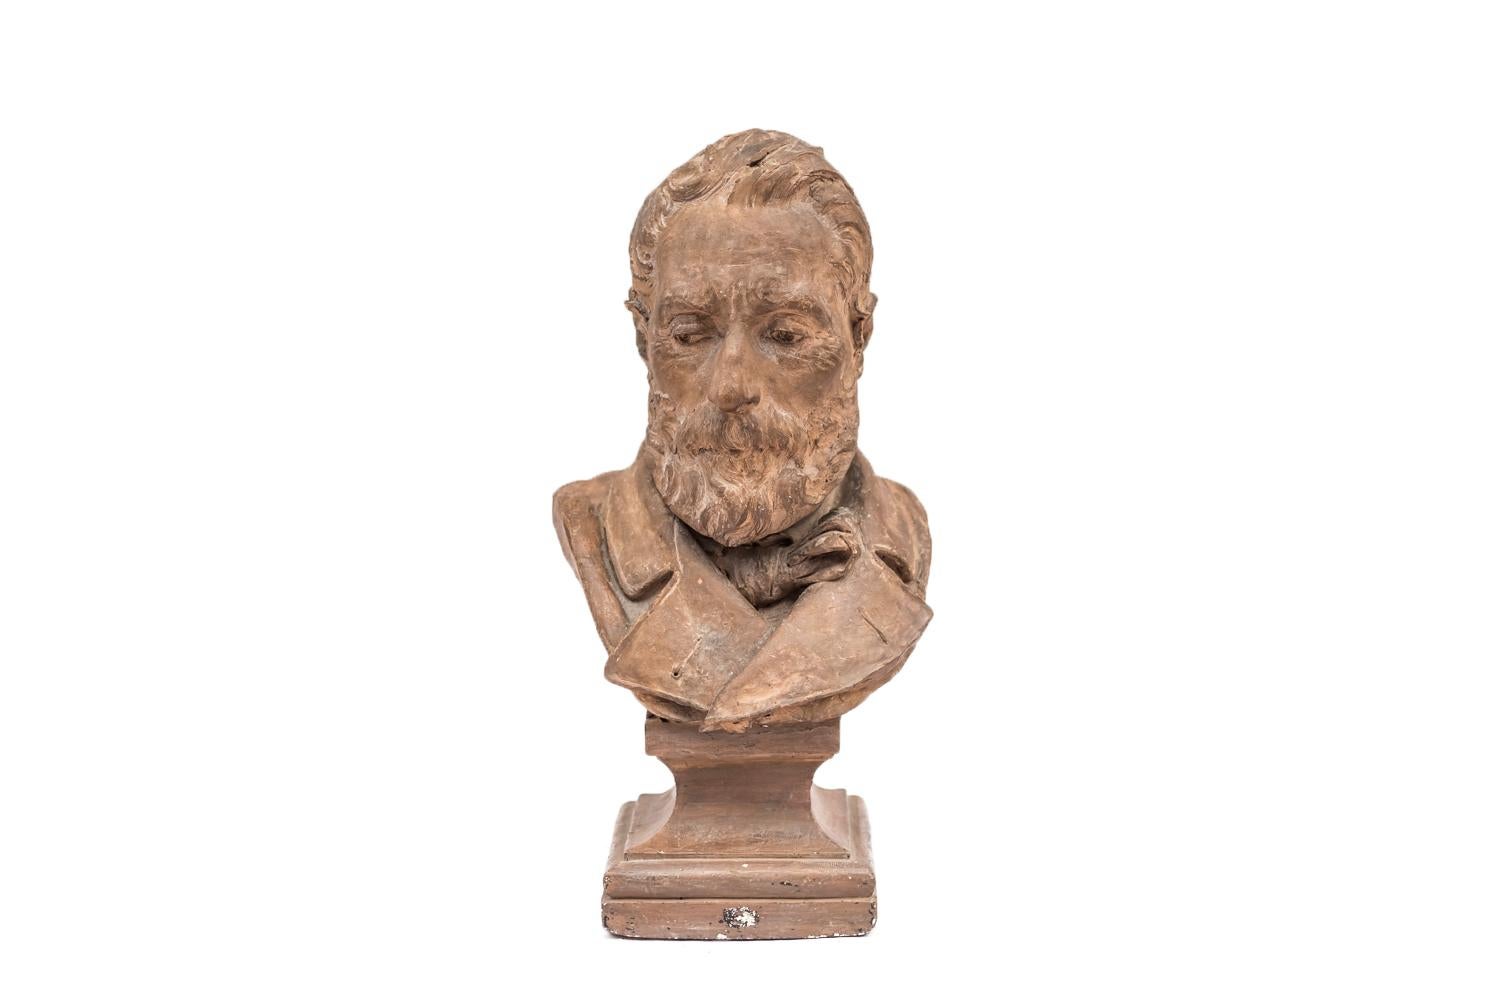 A. Fabre, signed.

Terracotta bust figuring an old and bearded man. He wears a 19th century style jacket and a scarf around his neck.
He stands on a piedestal and a square base.

Signed “A.FABRE” and dated 1878 on the back bust.

Work